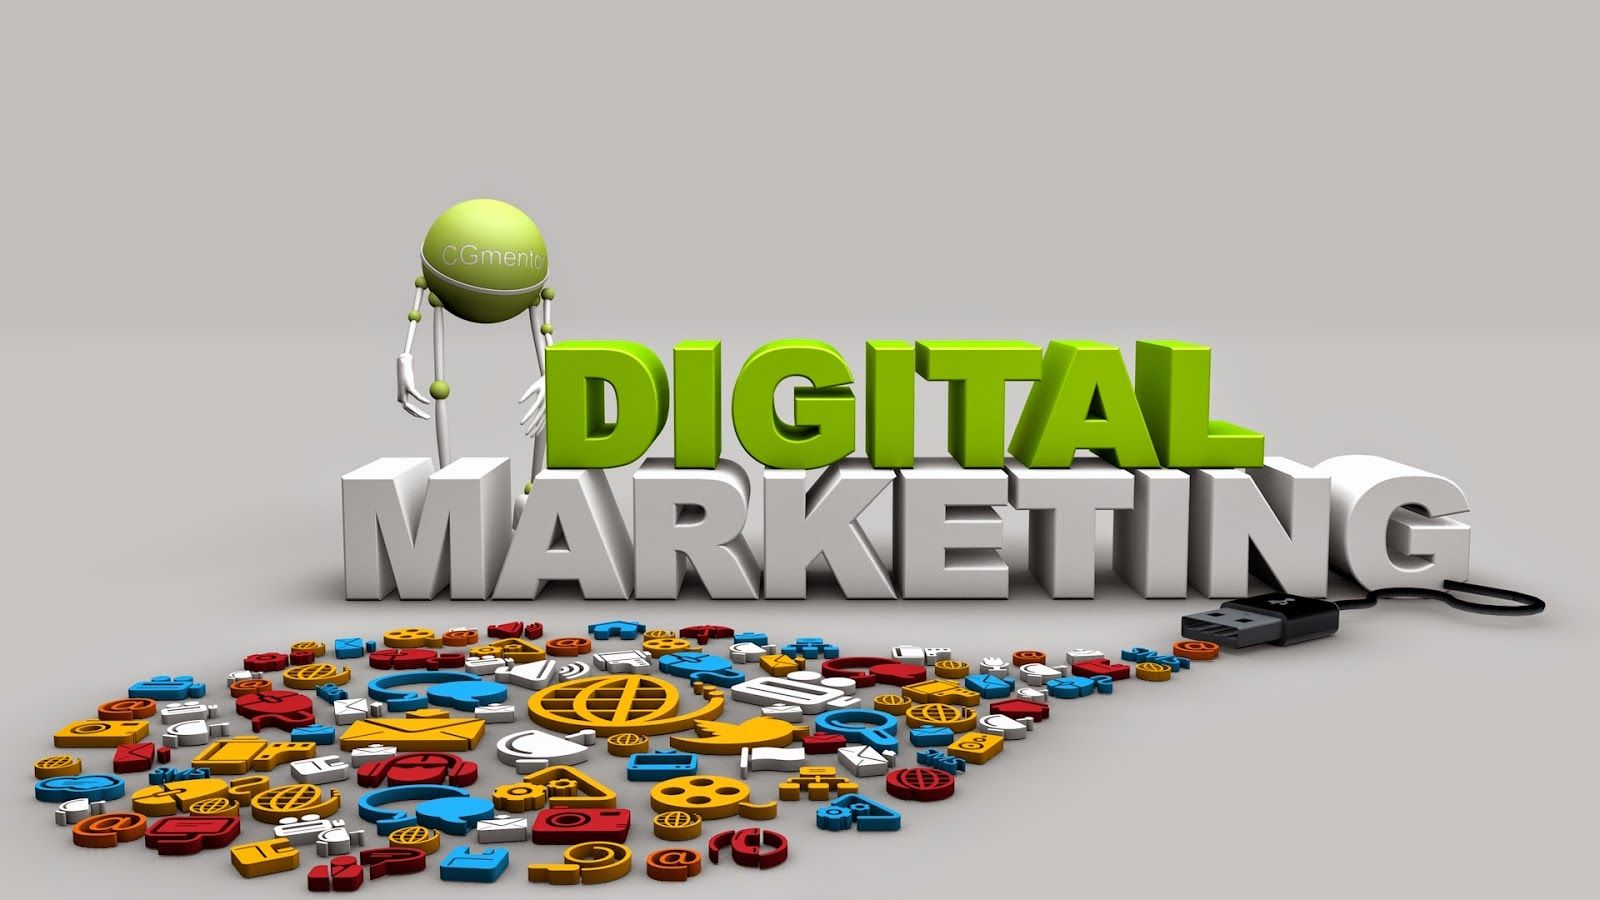 Digital marketing Importance in Small Businesses